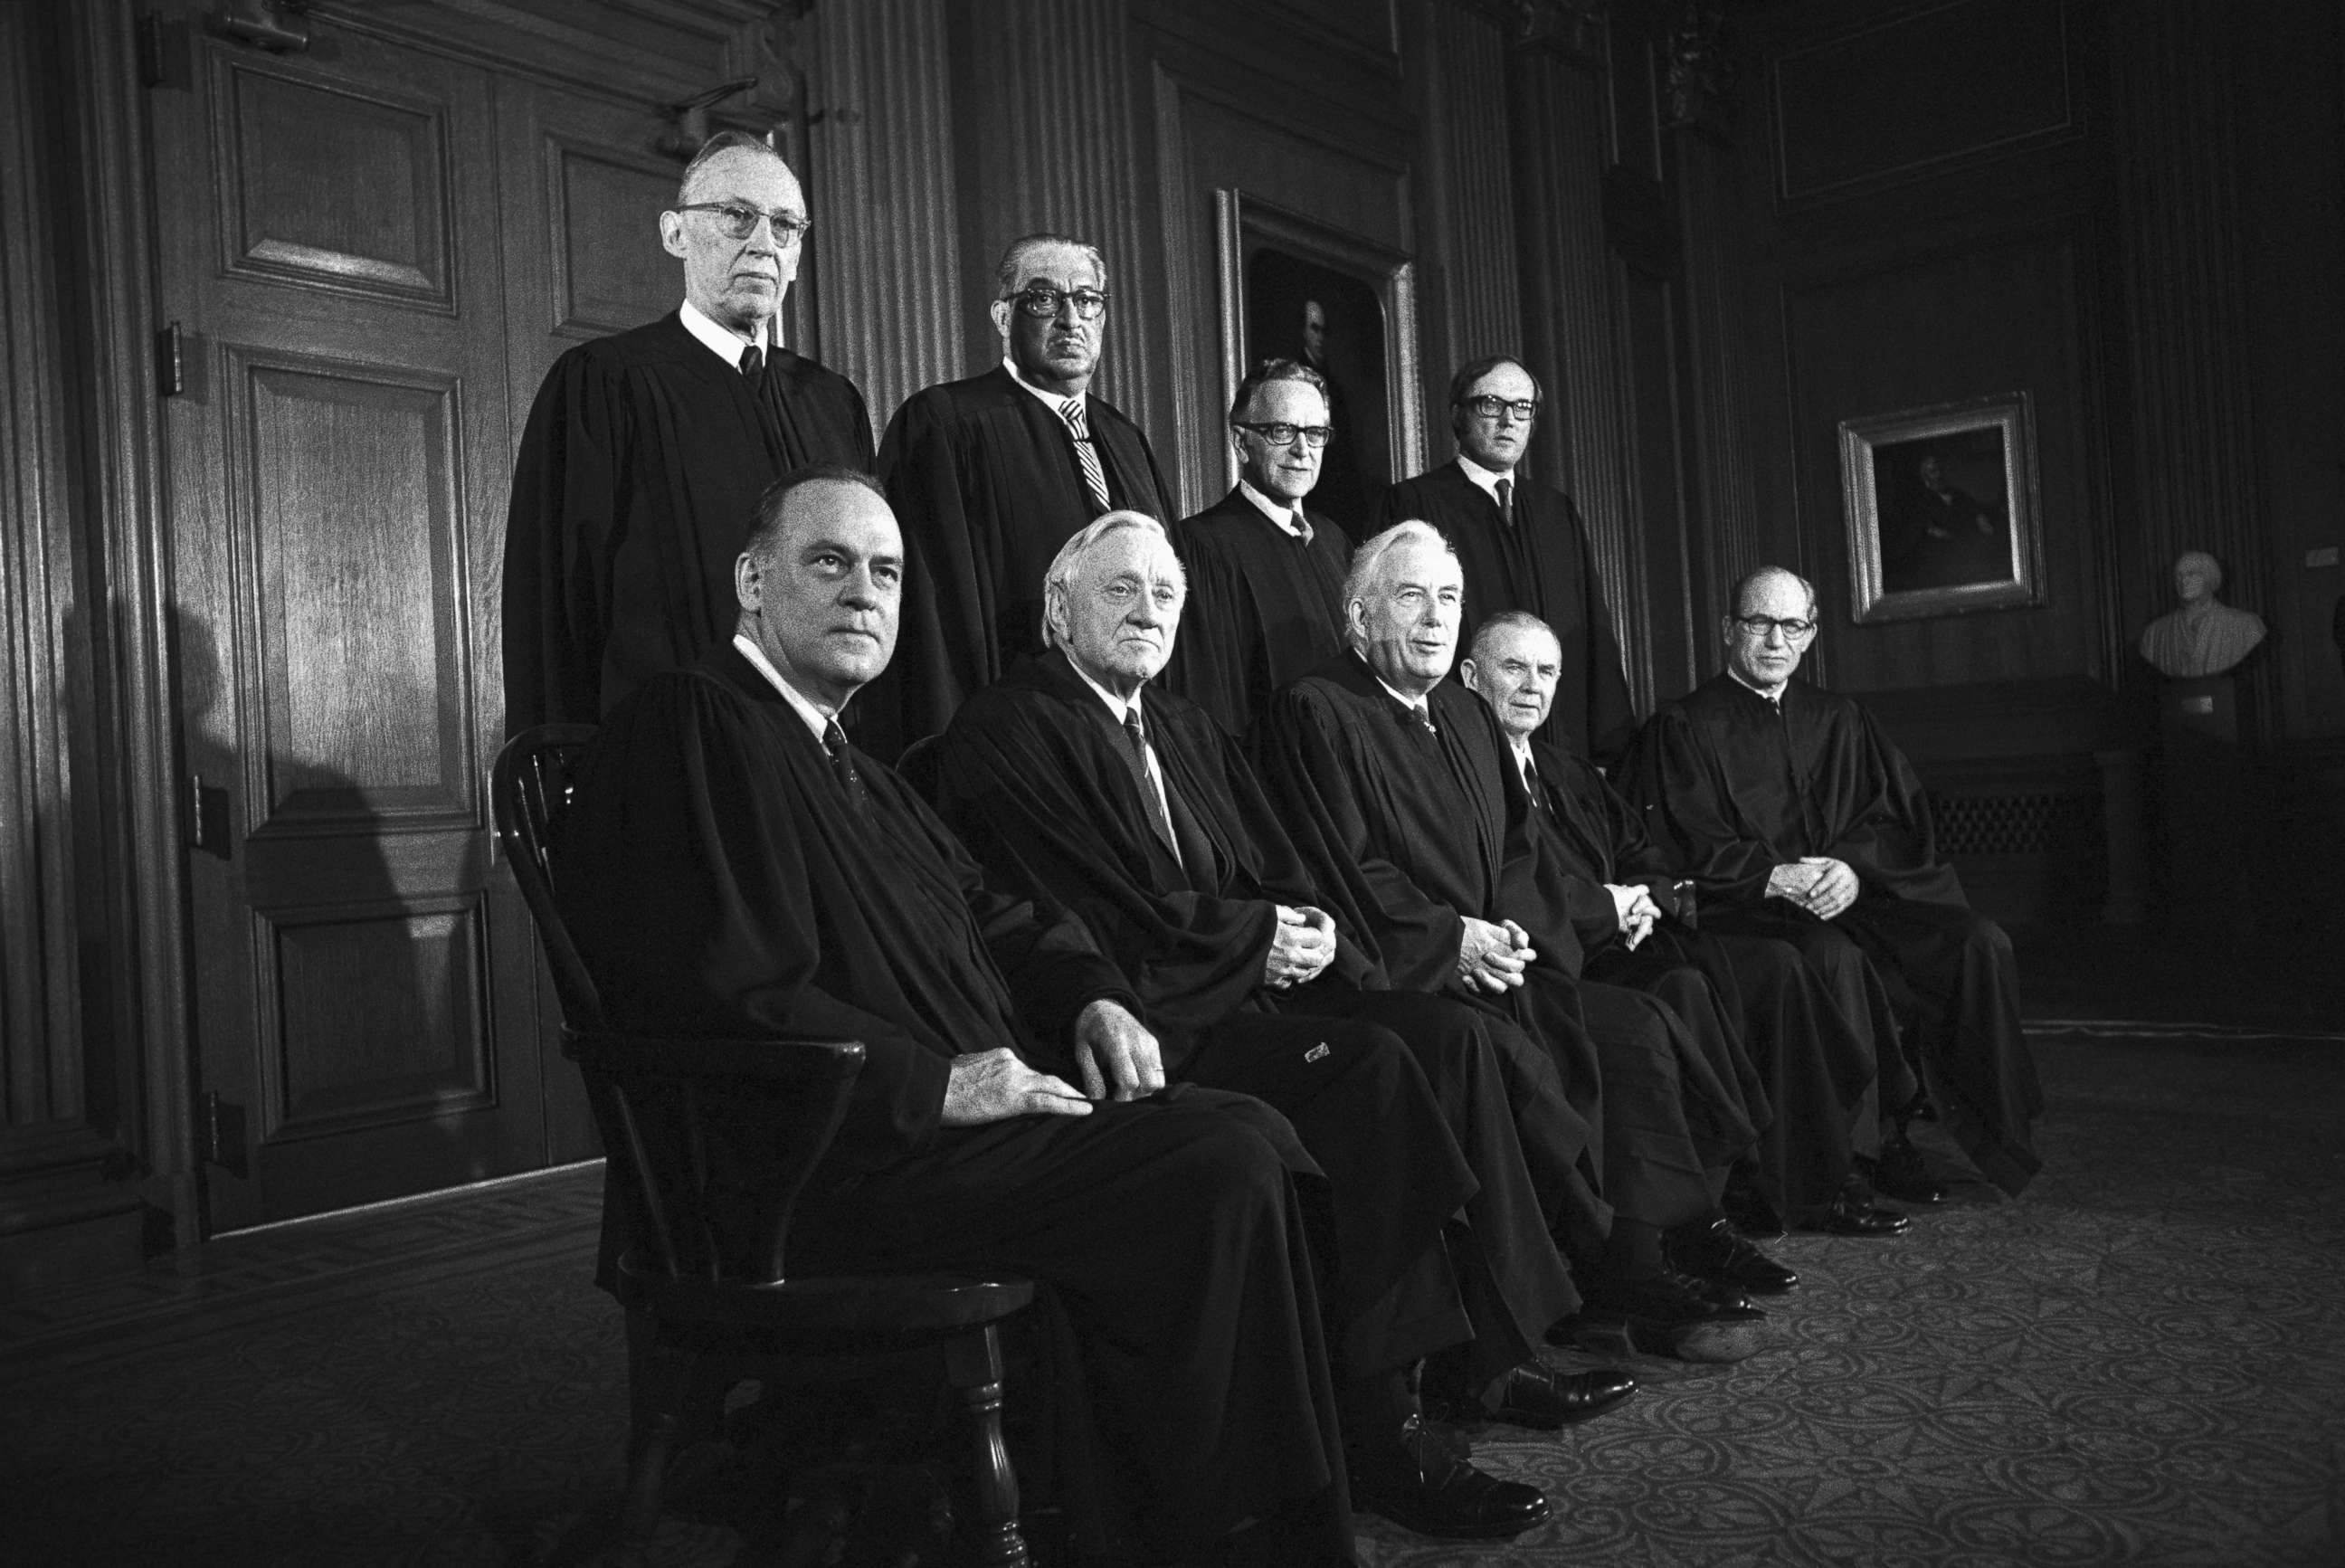 PHOTO: Justices of the Supreme Court of the United States pose for an official portrait in 1972.